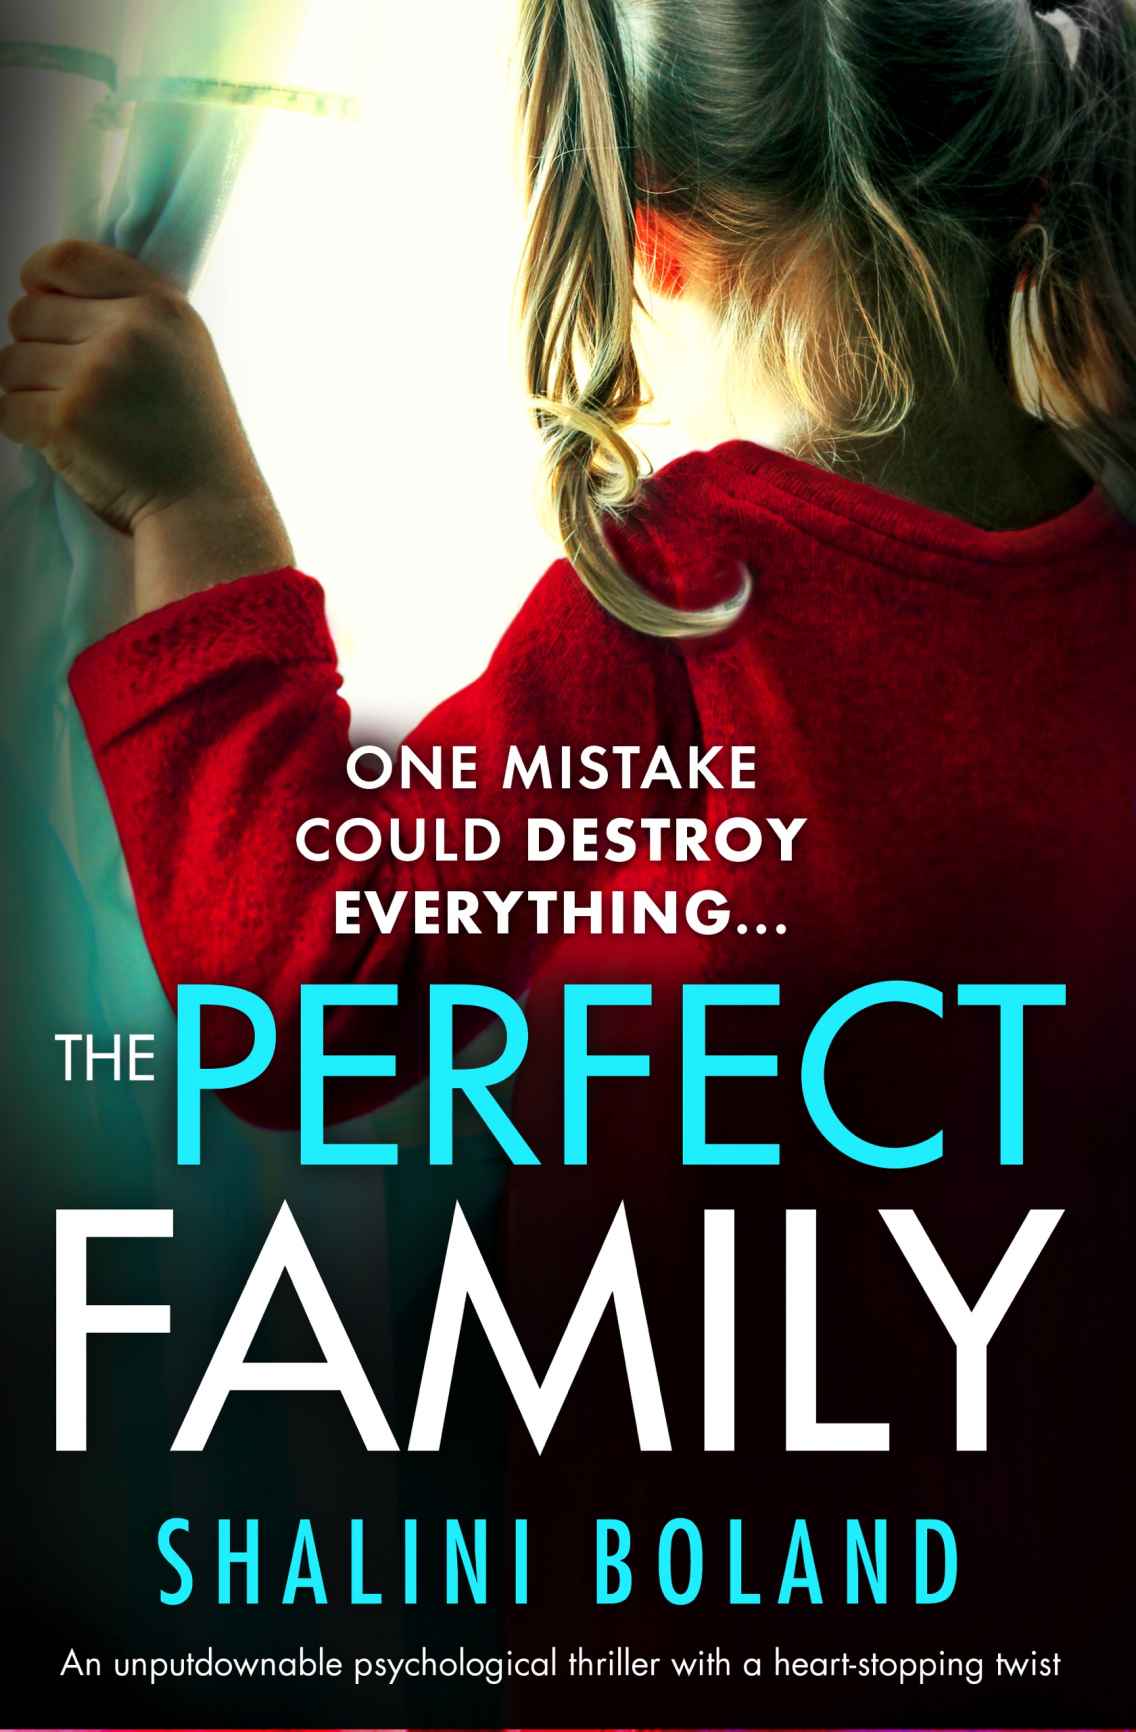 The Perfect Family: An Unputdownable Psychological Thriller With a Heartstopping Twist